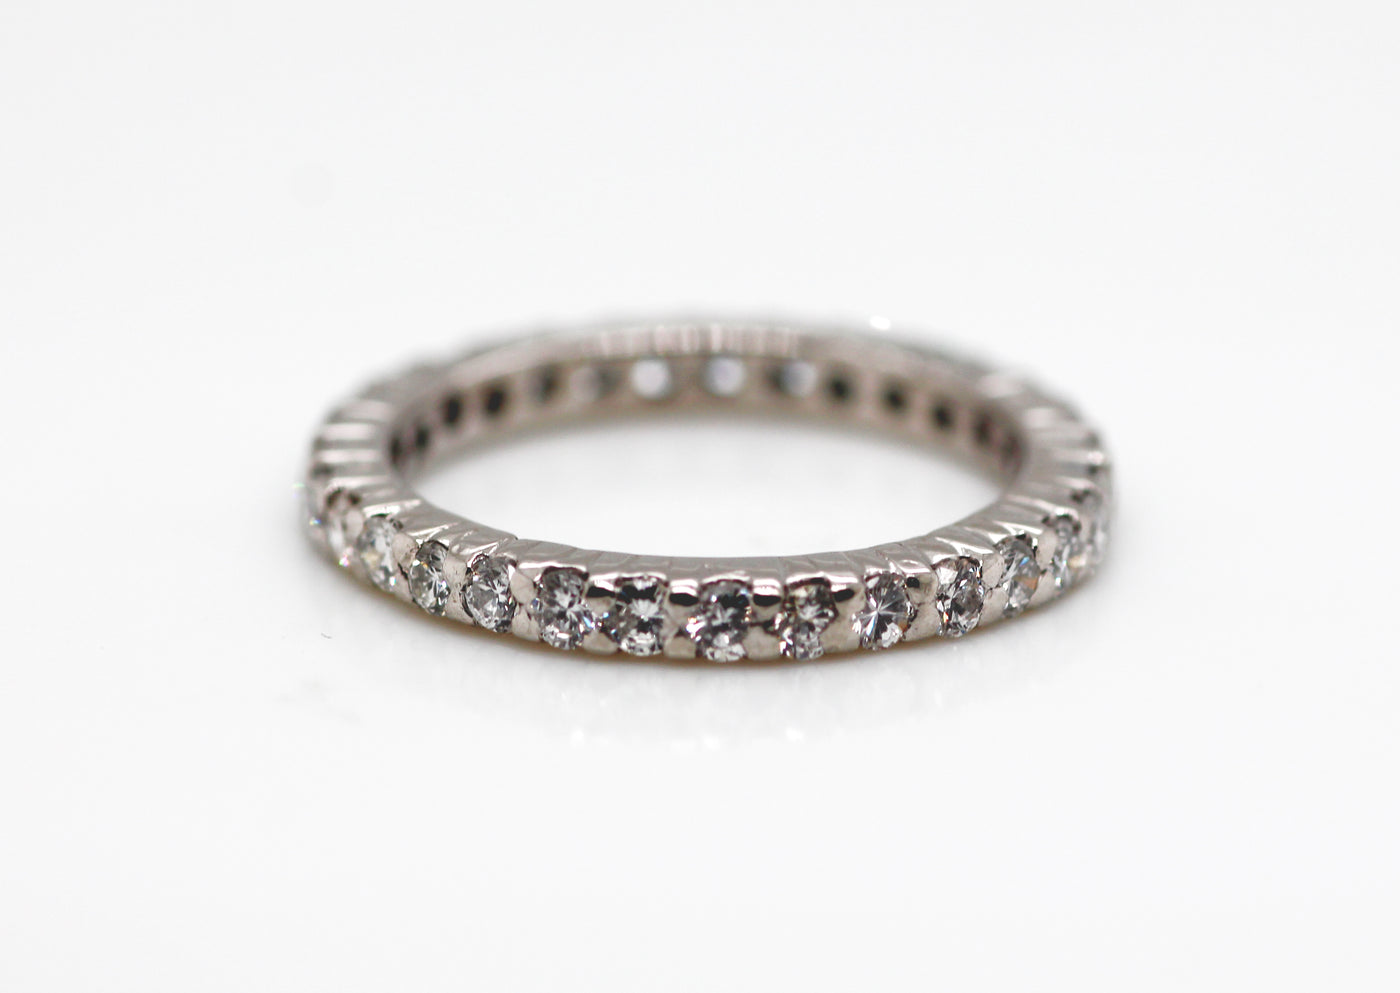 PLATINUM .93 CTTW DIAMOND ETERNITY BAND 
some chipped stones, AS IS